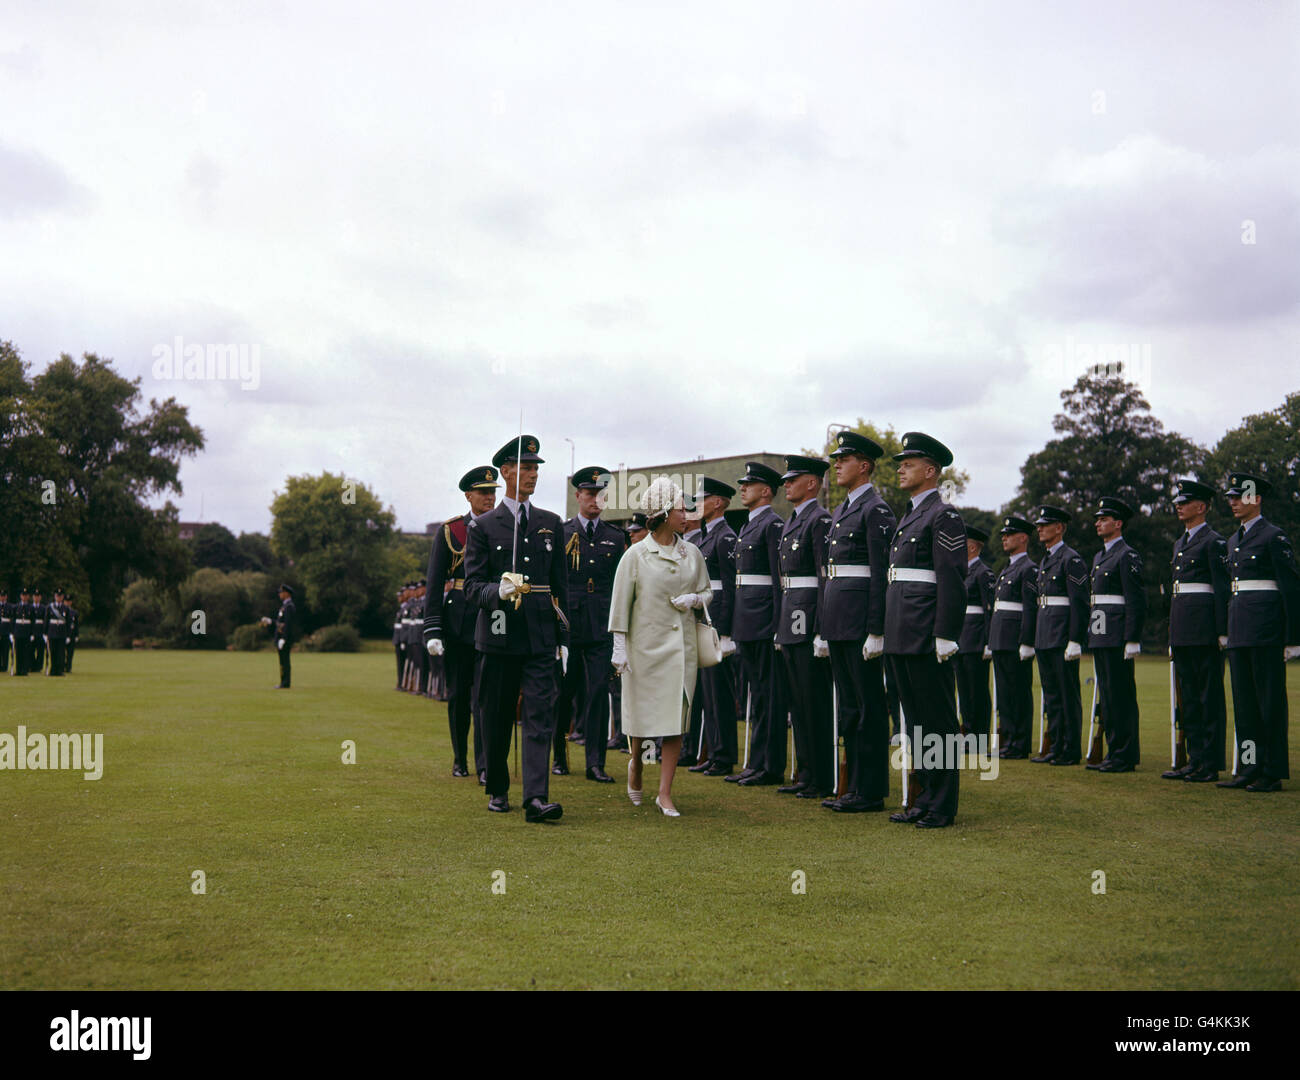 Queen Elizabeth II inspecting units of the RAF, during a ceremony where she presented new colours to the RAF at Buckingham Palace. Stock Photo